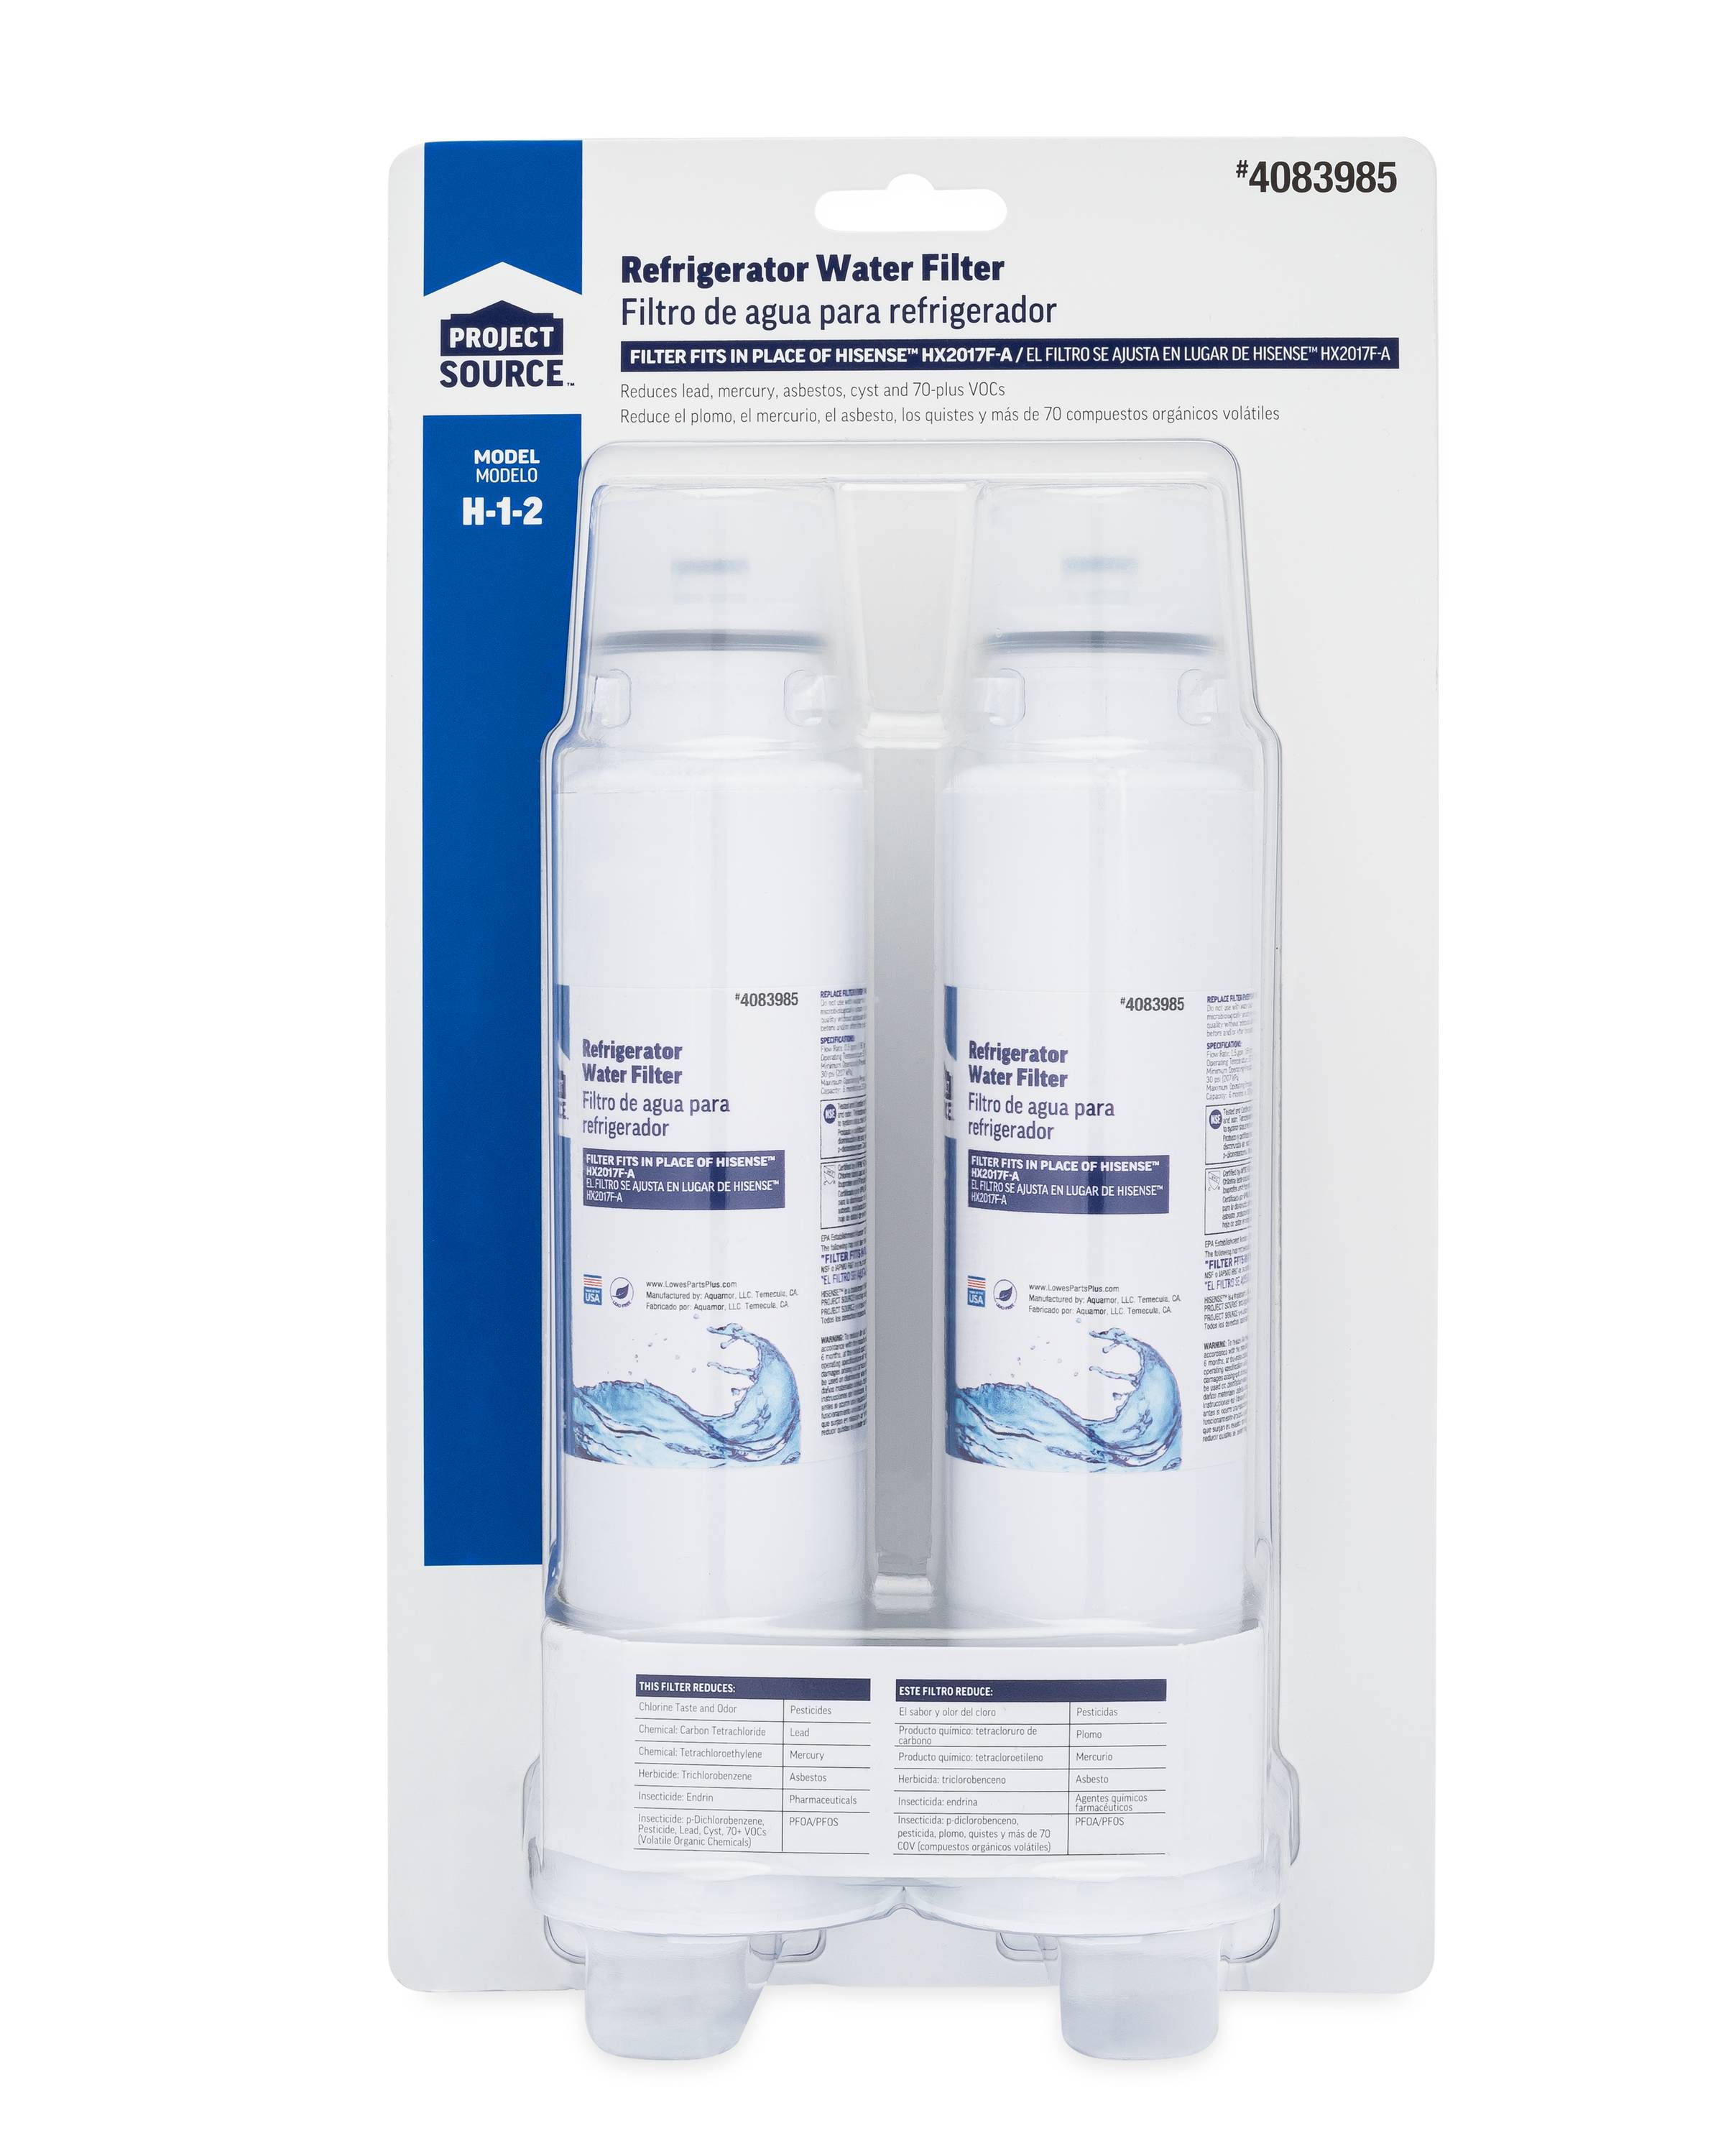 Details about   PURE H20 WATER FILTER REFRIGERATOR PH21220 NEW FACTORY SEALED INSIDE QTY AVAIL 